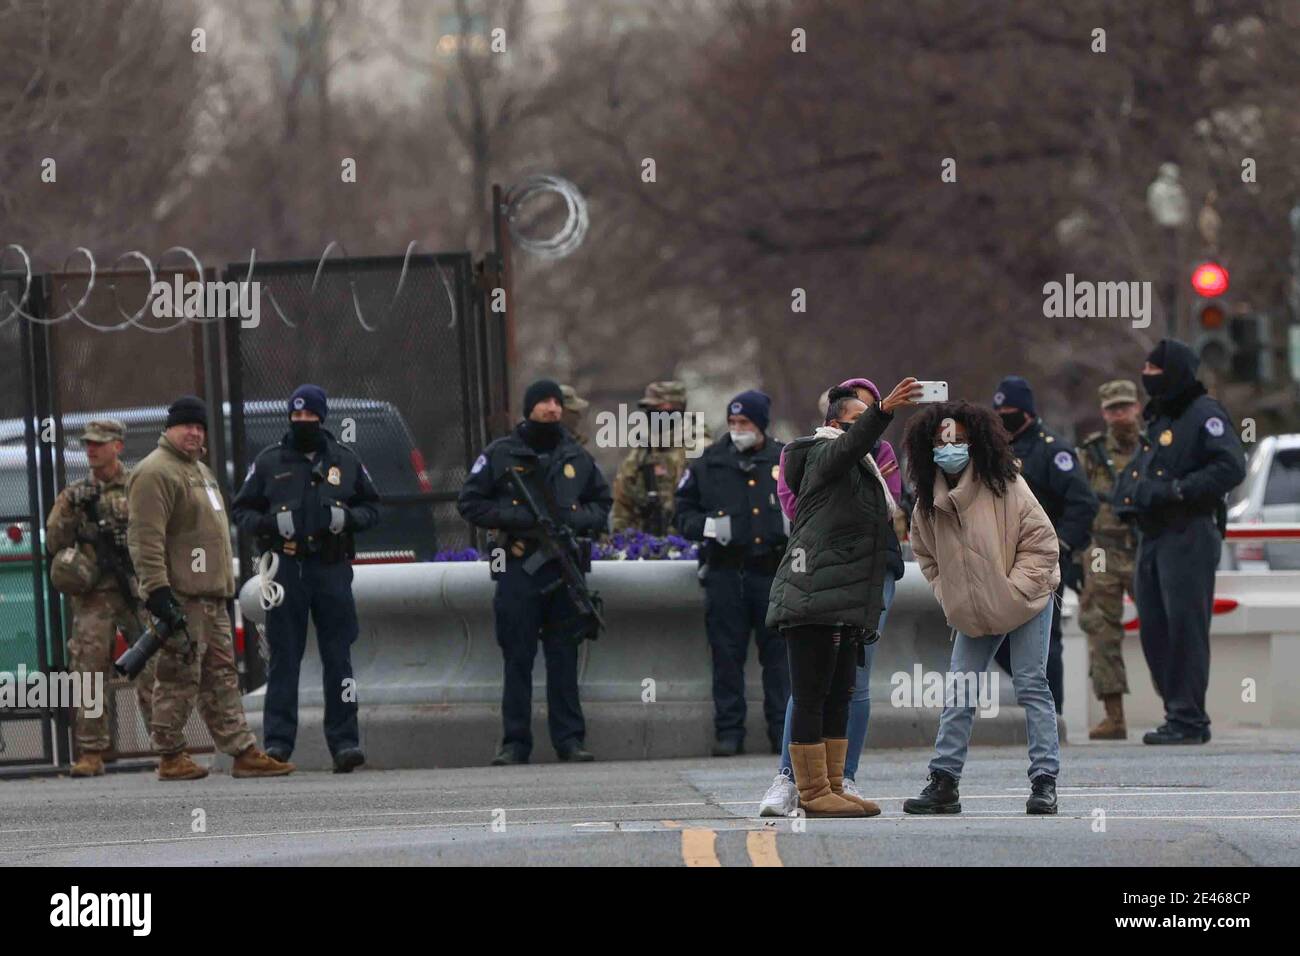 Civilians take selfies in front of a restricted area during Inauguration day Wednesday, Jan. 20, 2021, in Washington D.C Credit: Saquan Stimpson/CNP | usage worldwide Stock Photo